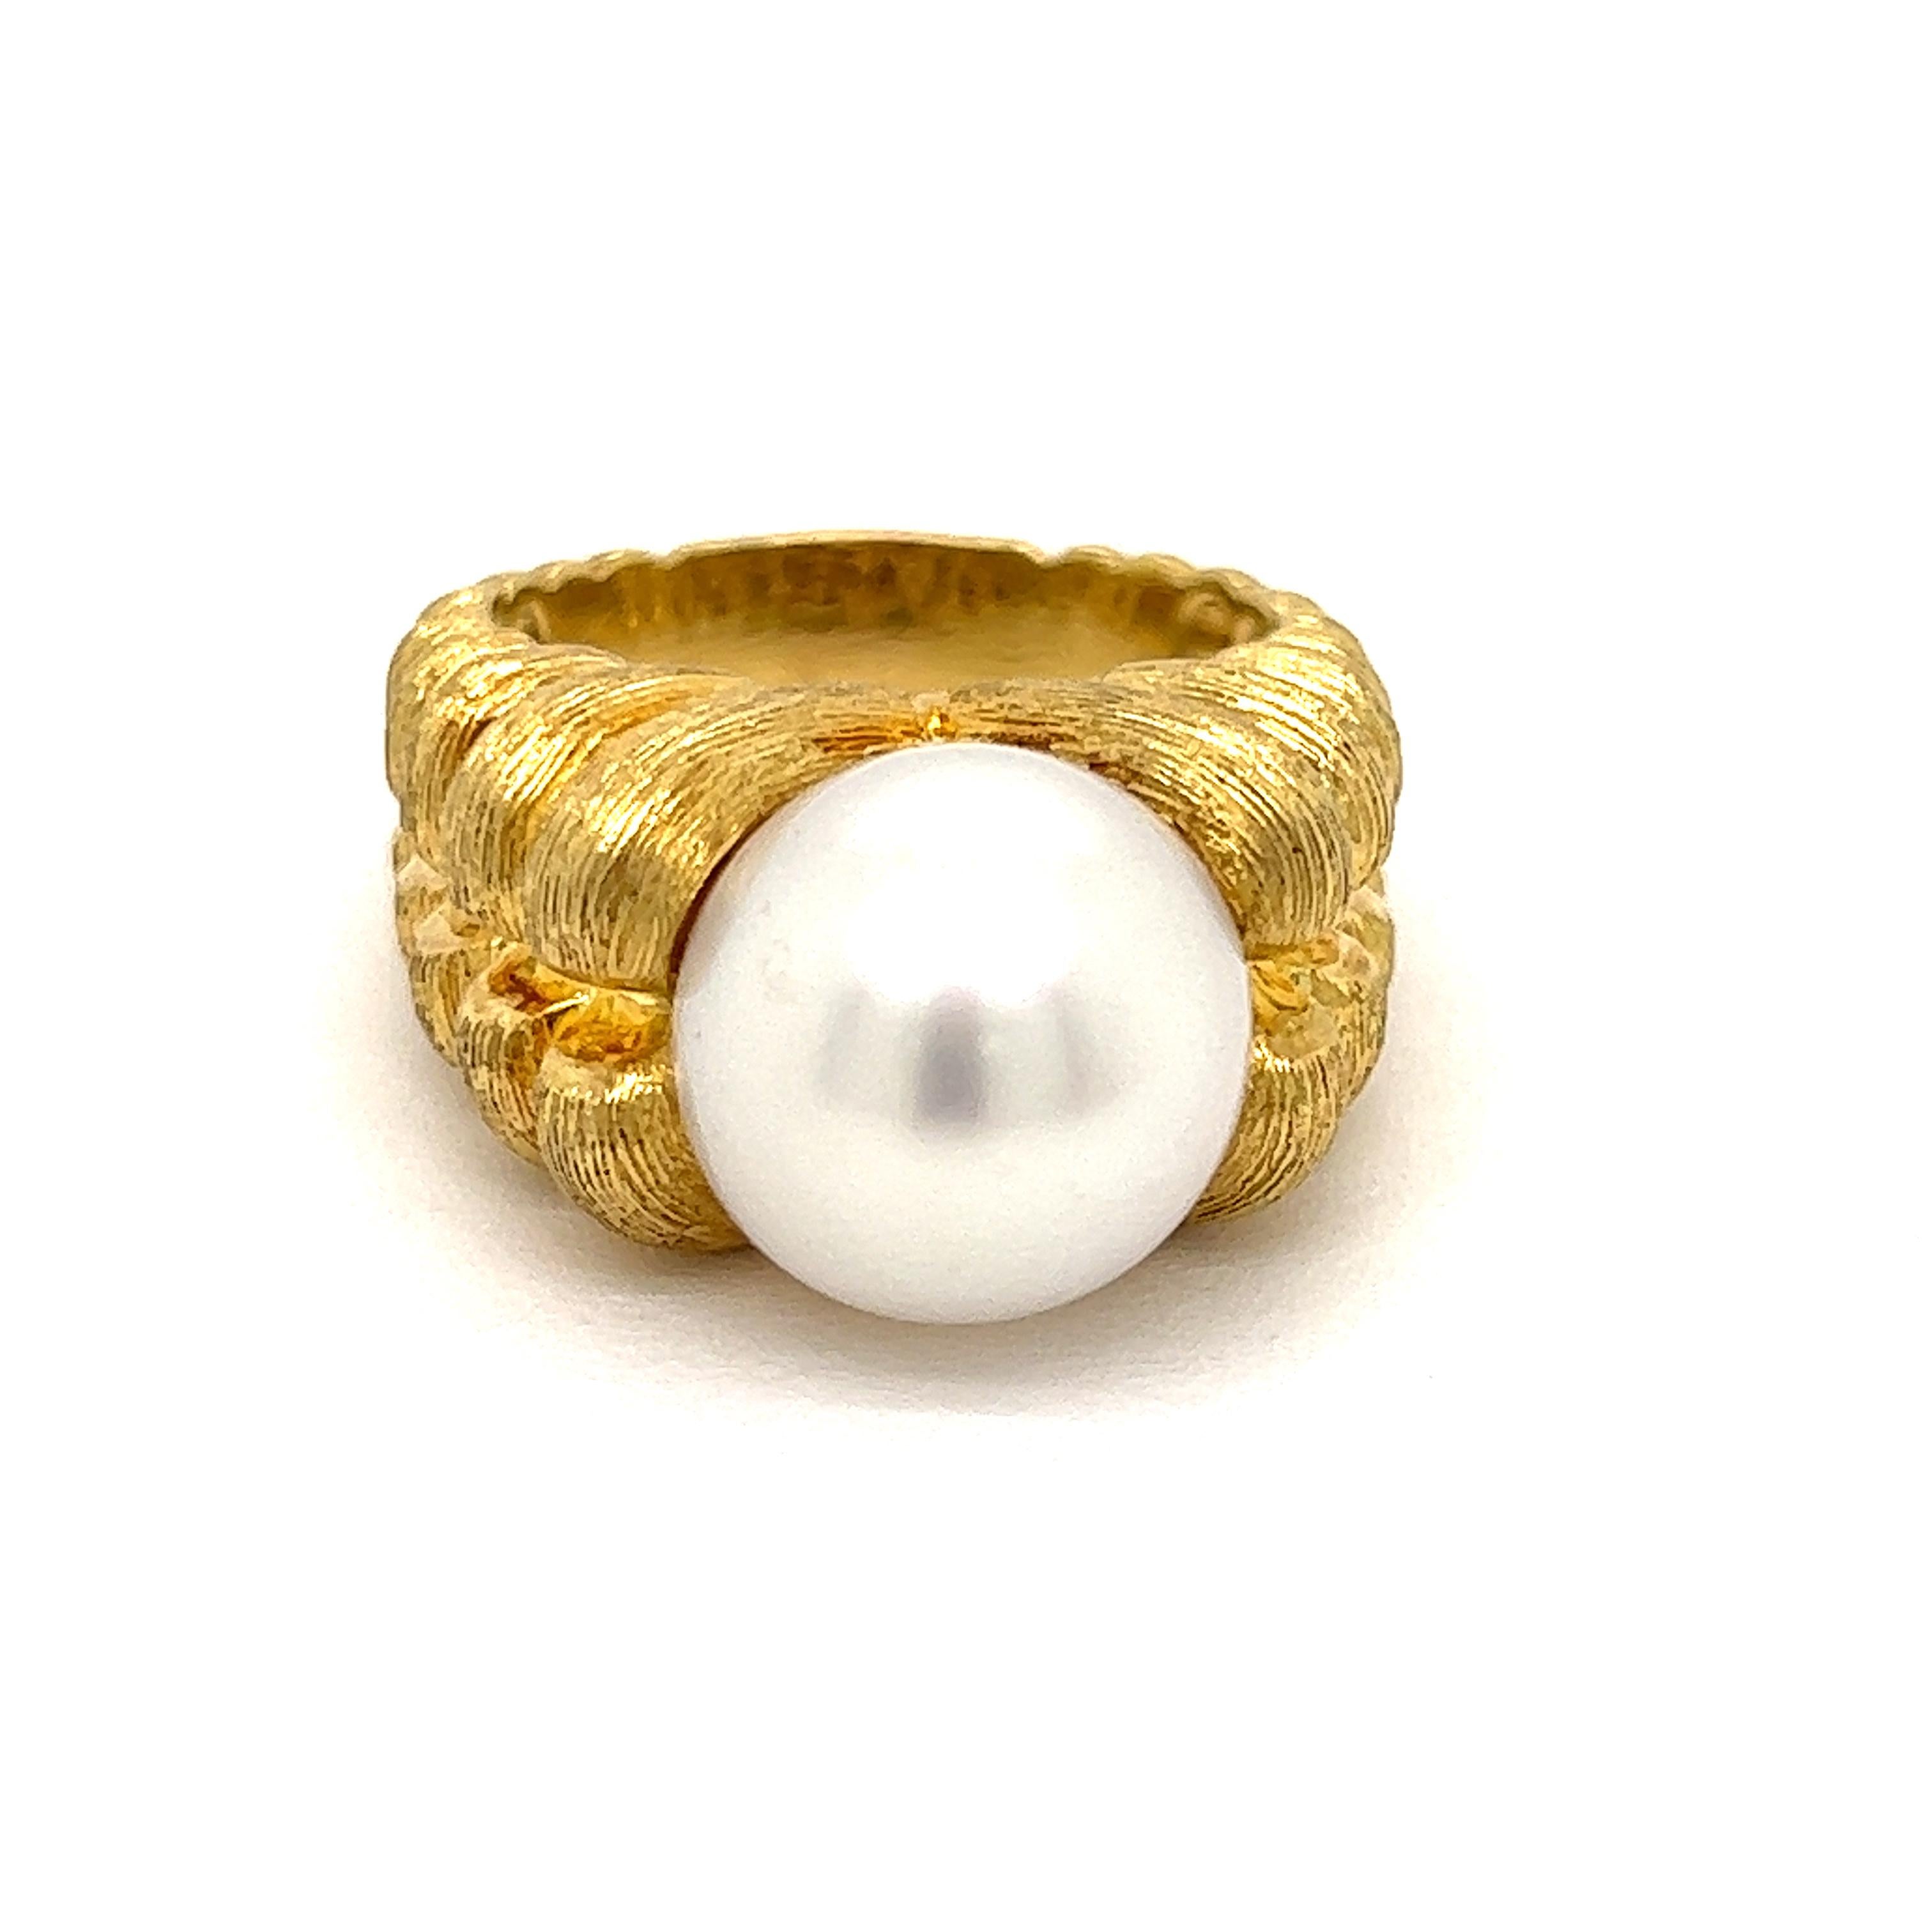 Bold. Stunning. Classic.  This Henry Dunay south sea pearl ring is a stunner.  With approximately ten grams of  18K yellow gold expertly crafted with the designers fine scratched surface technique known as Sabi.  The beautiful clean cultivated white